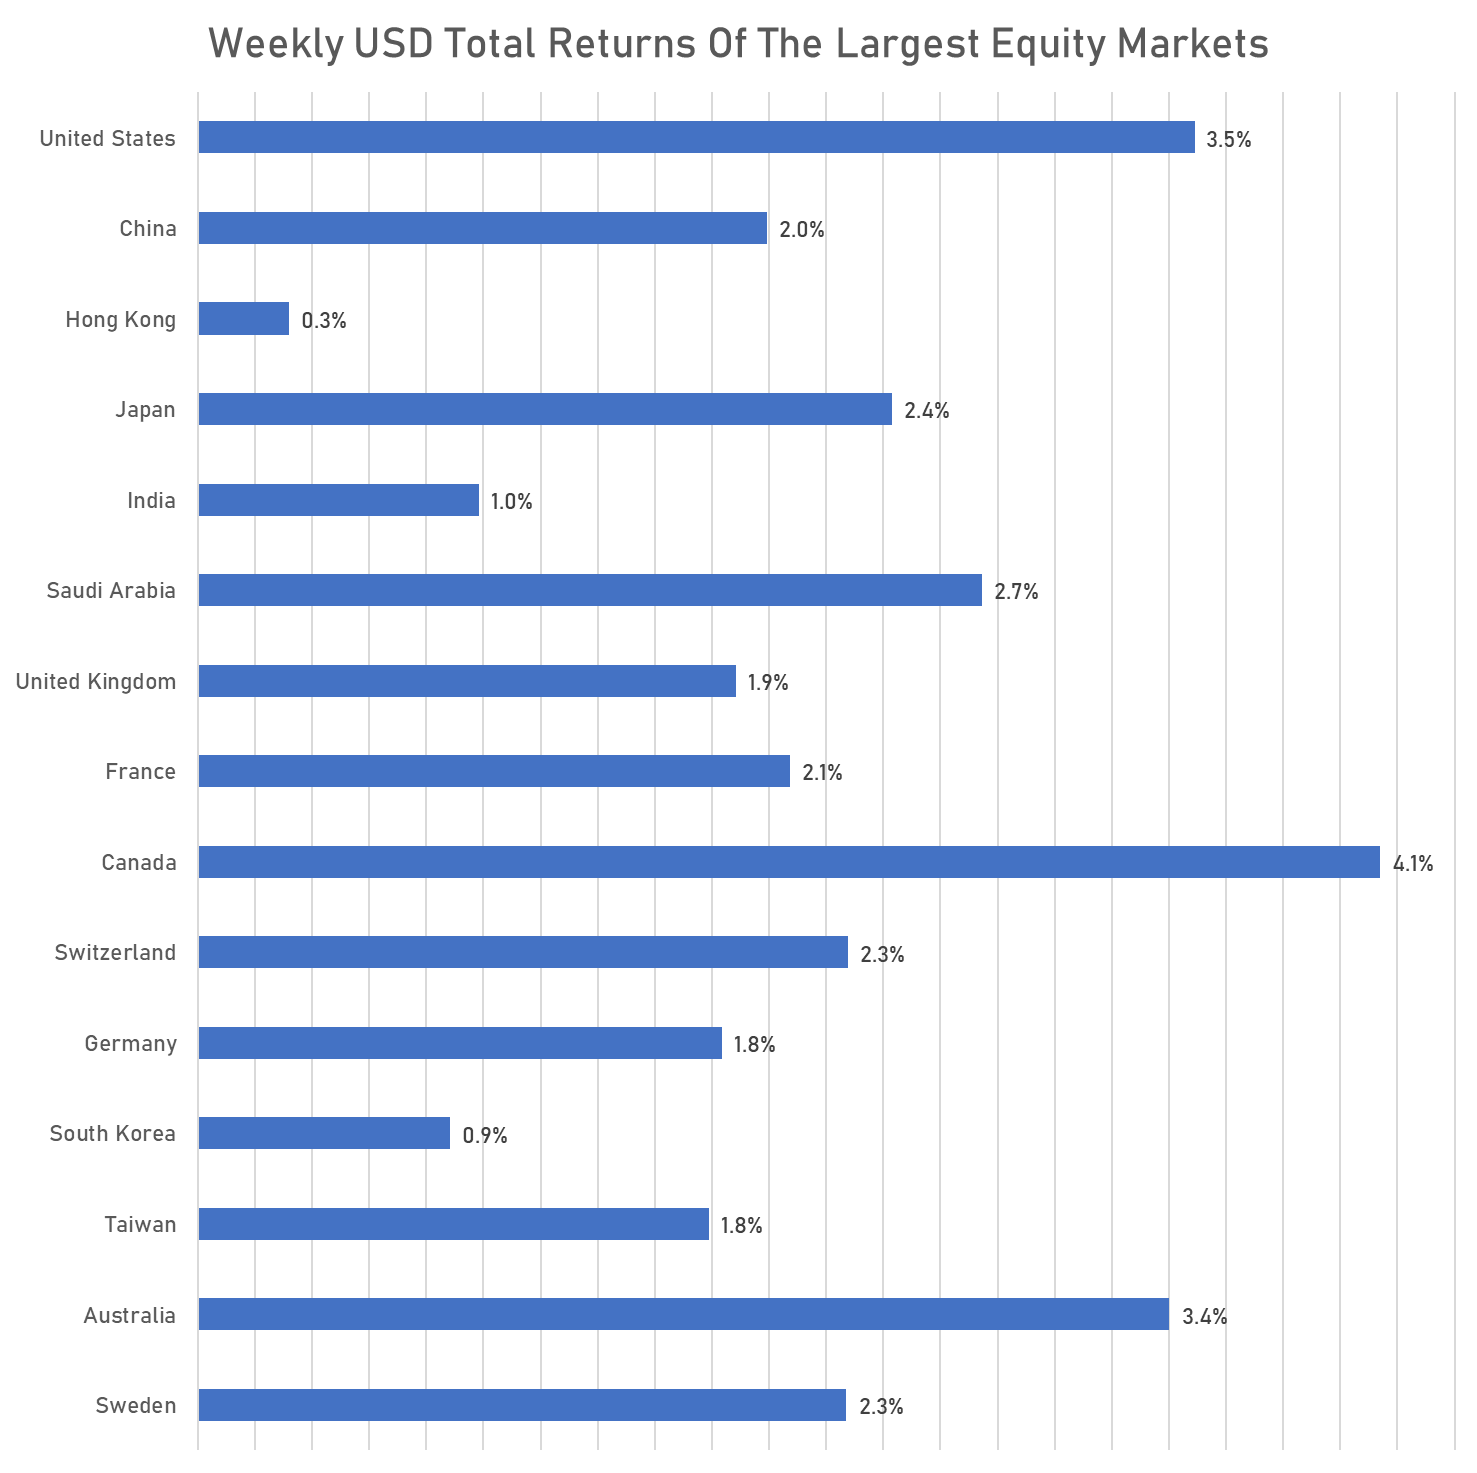 Weekly US$ Total Returns Performance of The Global Equity Markets | Sources: phipost.com, FactSet data